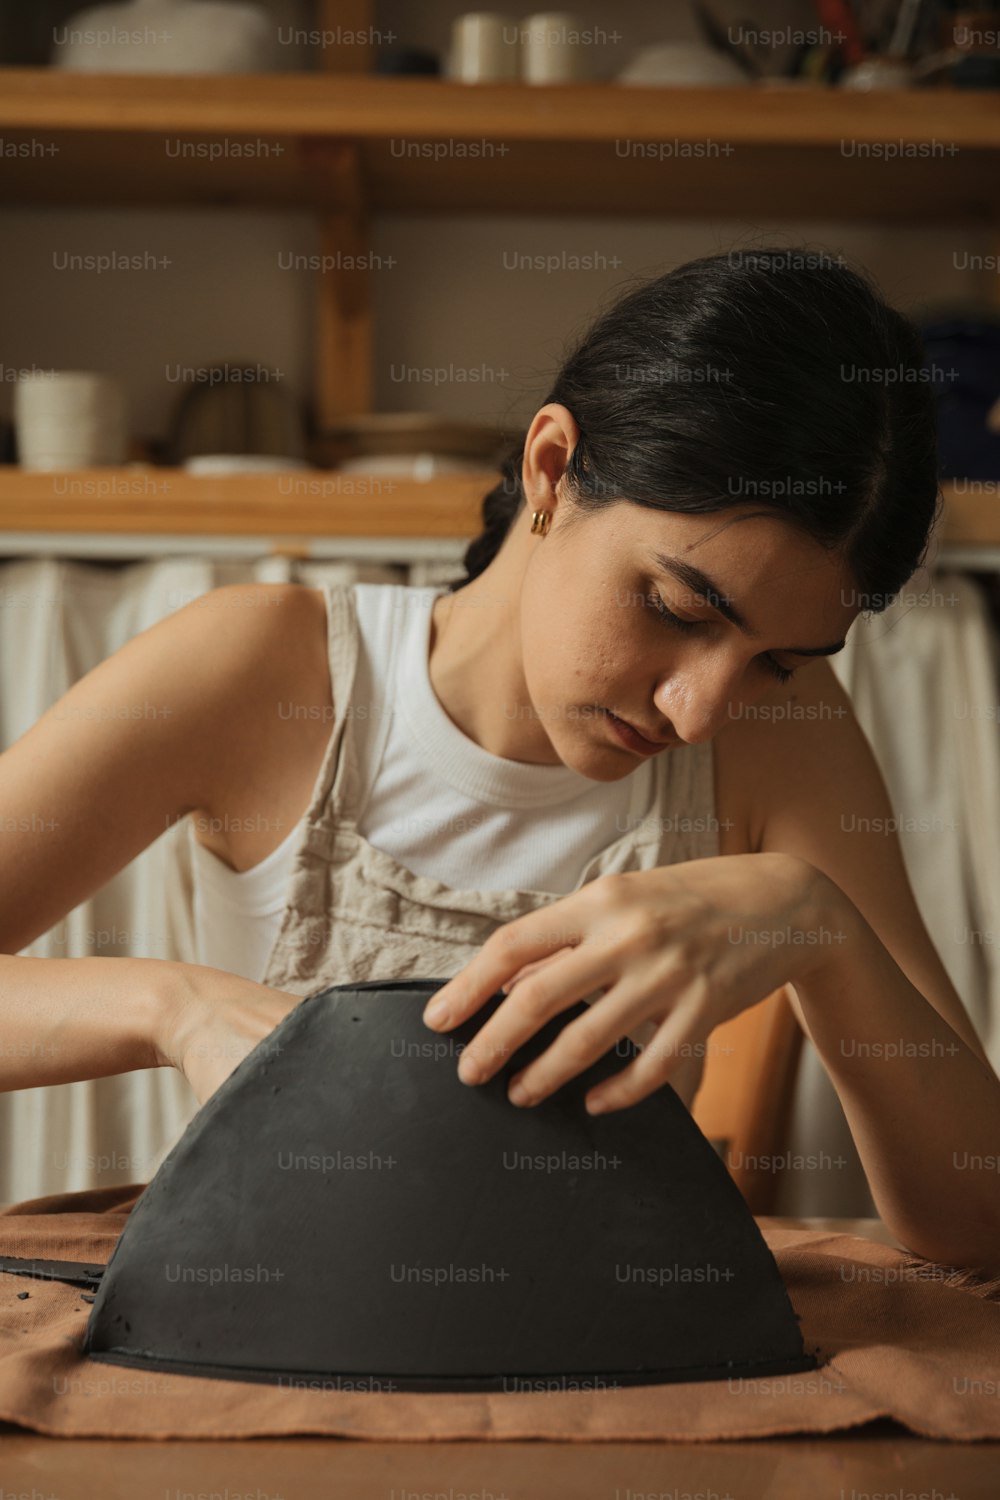 a woman in a white shirt is working on a black object